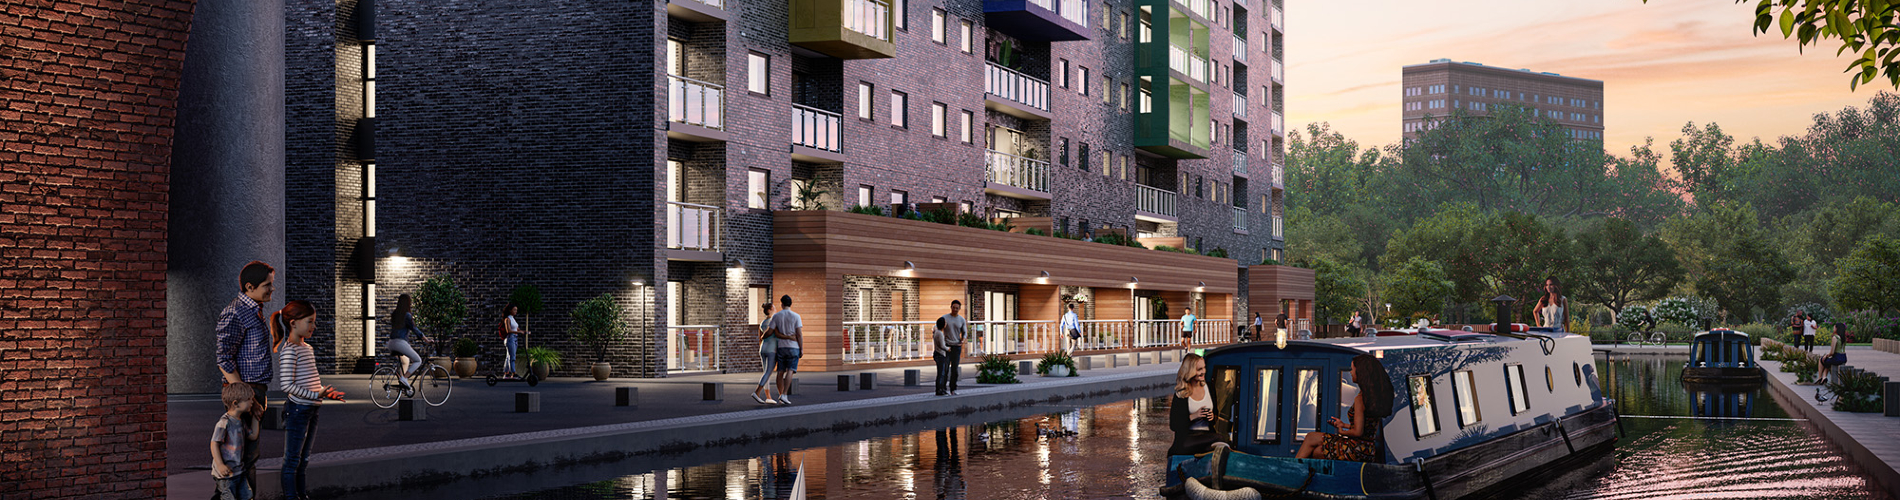 A CG rendering of the canalside view of Potato Wharf Manchester